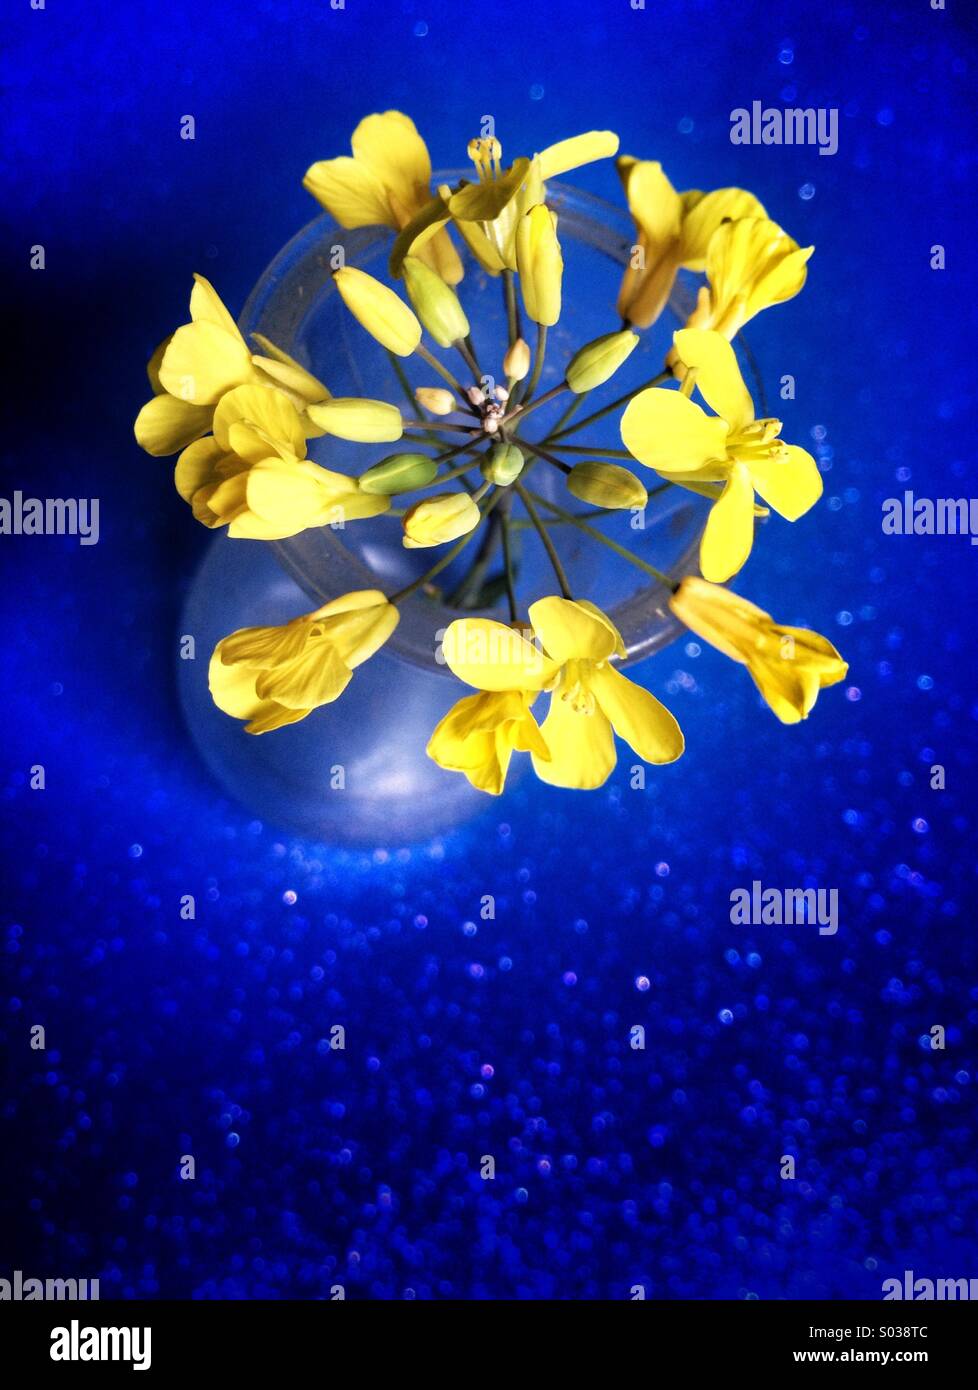 Yellow flowers in a glass vase on a blue background Stock Photo